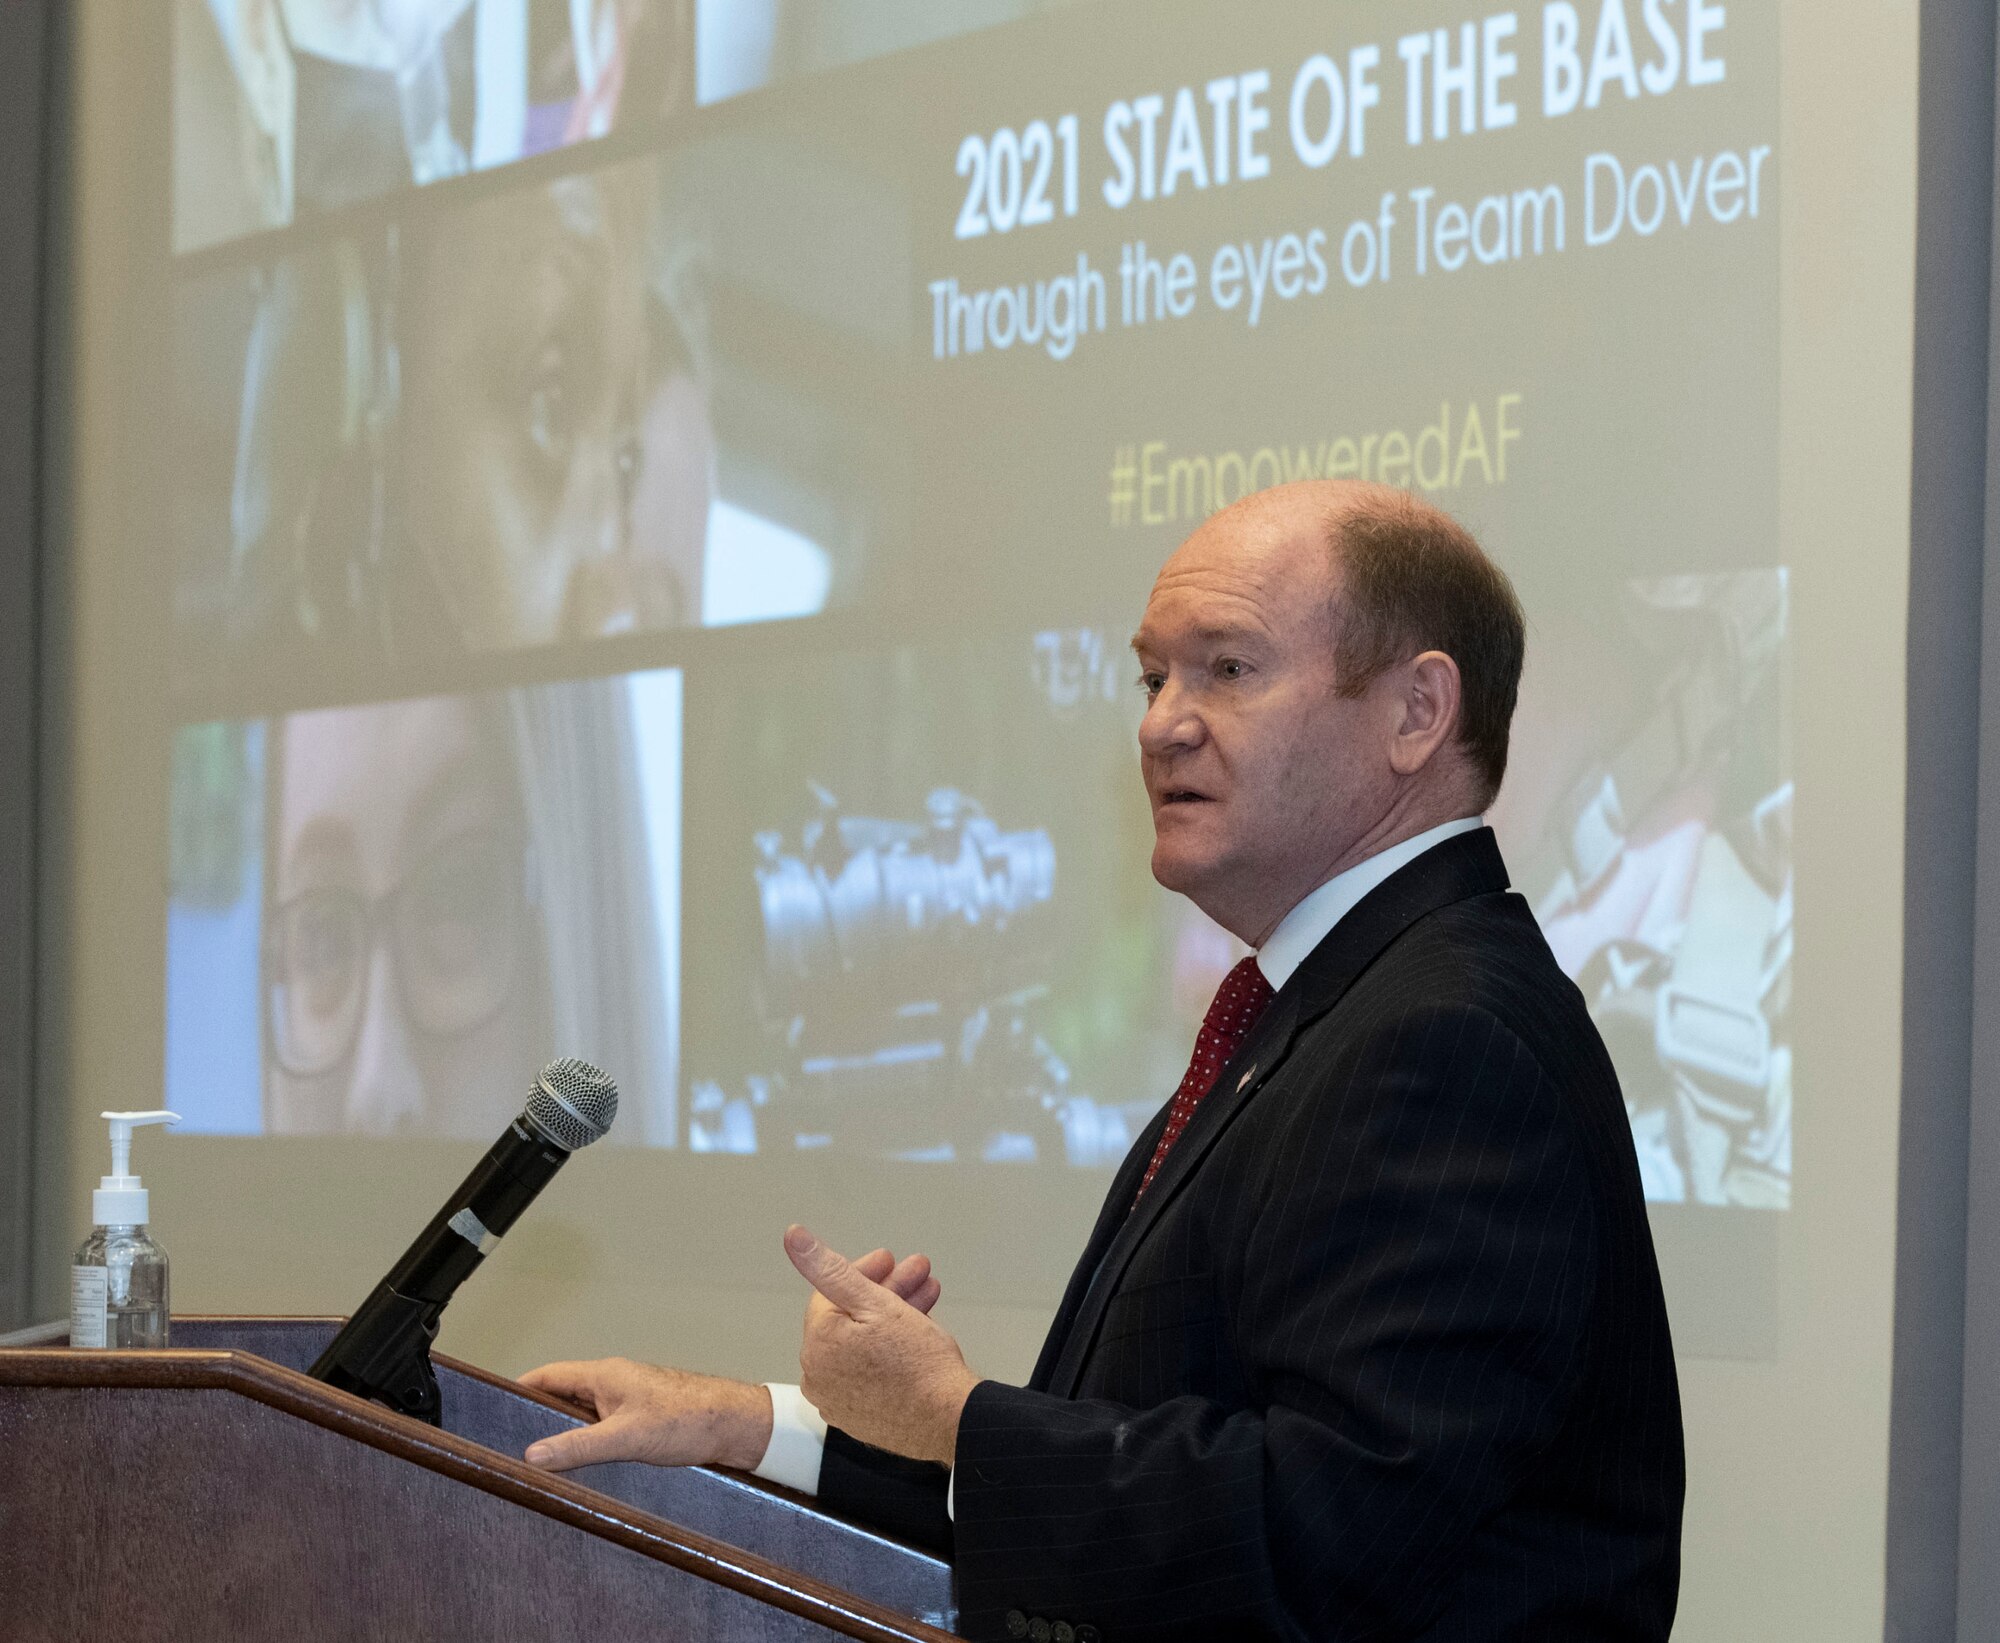 U.S. Sen. Chris Coons, addresses U.S. congressional delegates from Delaware, Central Delaware Chamber of Commerce members, local civic and business leaders and Team Dover members at the 2021 State of the Base briefing on Dover Air Force Base, Delaware, Nov. 22, 2021. The event was hosted by the Central Delaware Chamber of Commerce and provided an opportunity to educate and inform community members and leaders on how the Dover community ties into the base's mission, vision and priorities. (U.S. Air Force photo by Roland Balik)